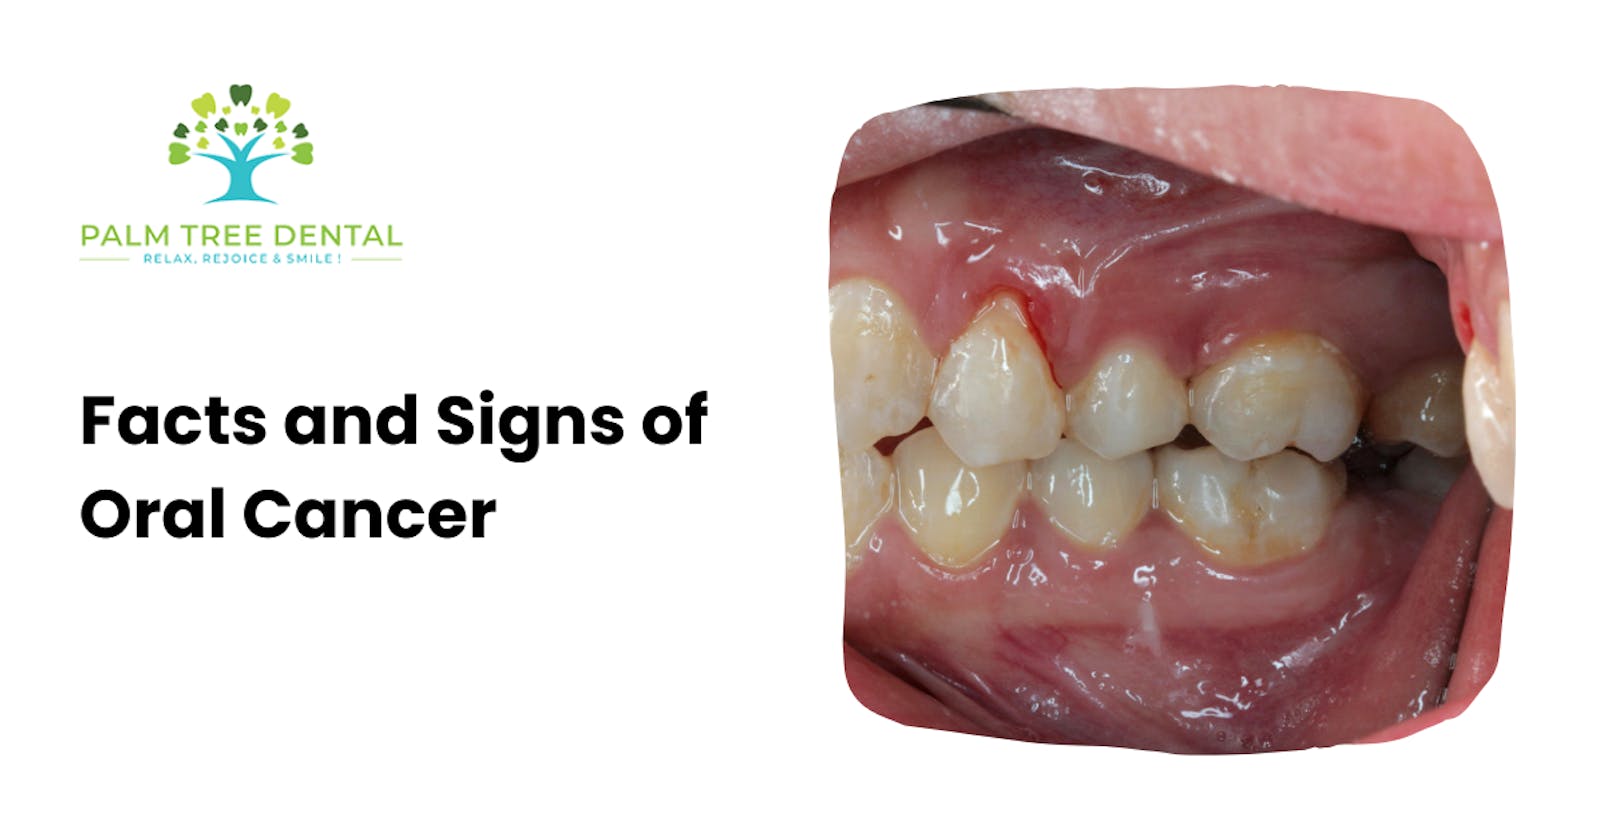 Facts and Signs of Oral Cancer